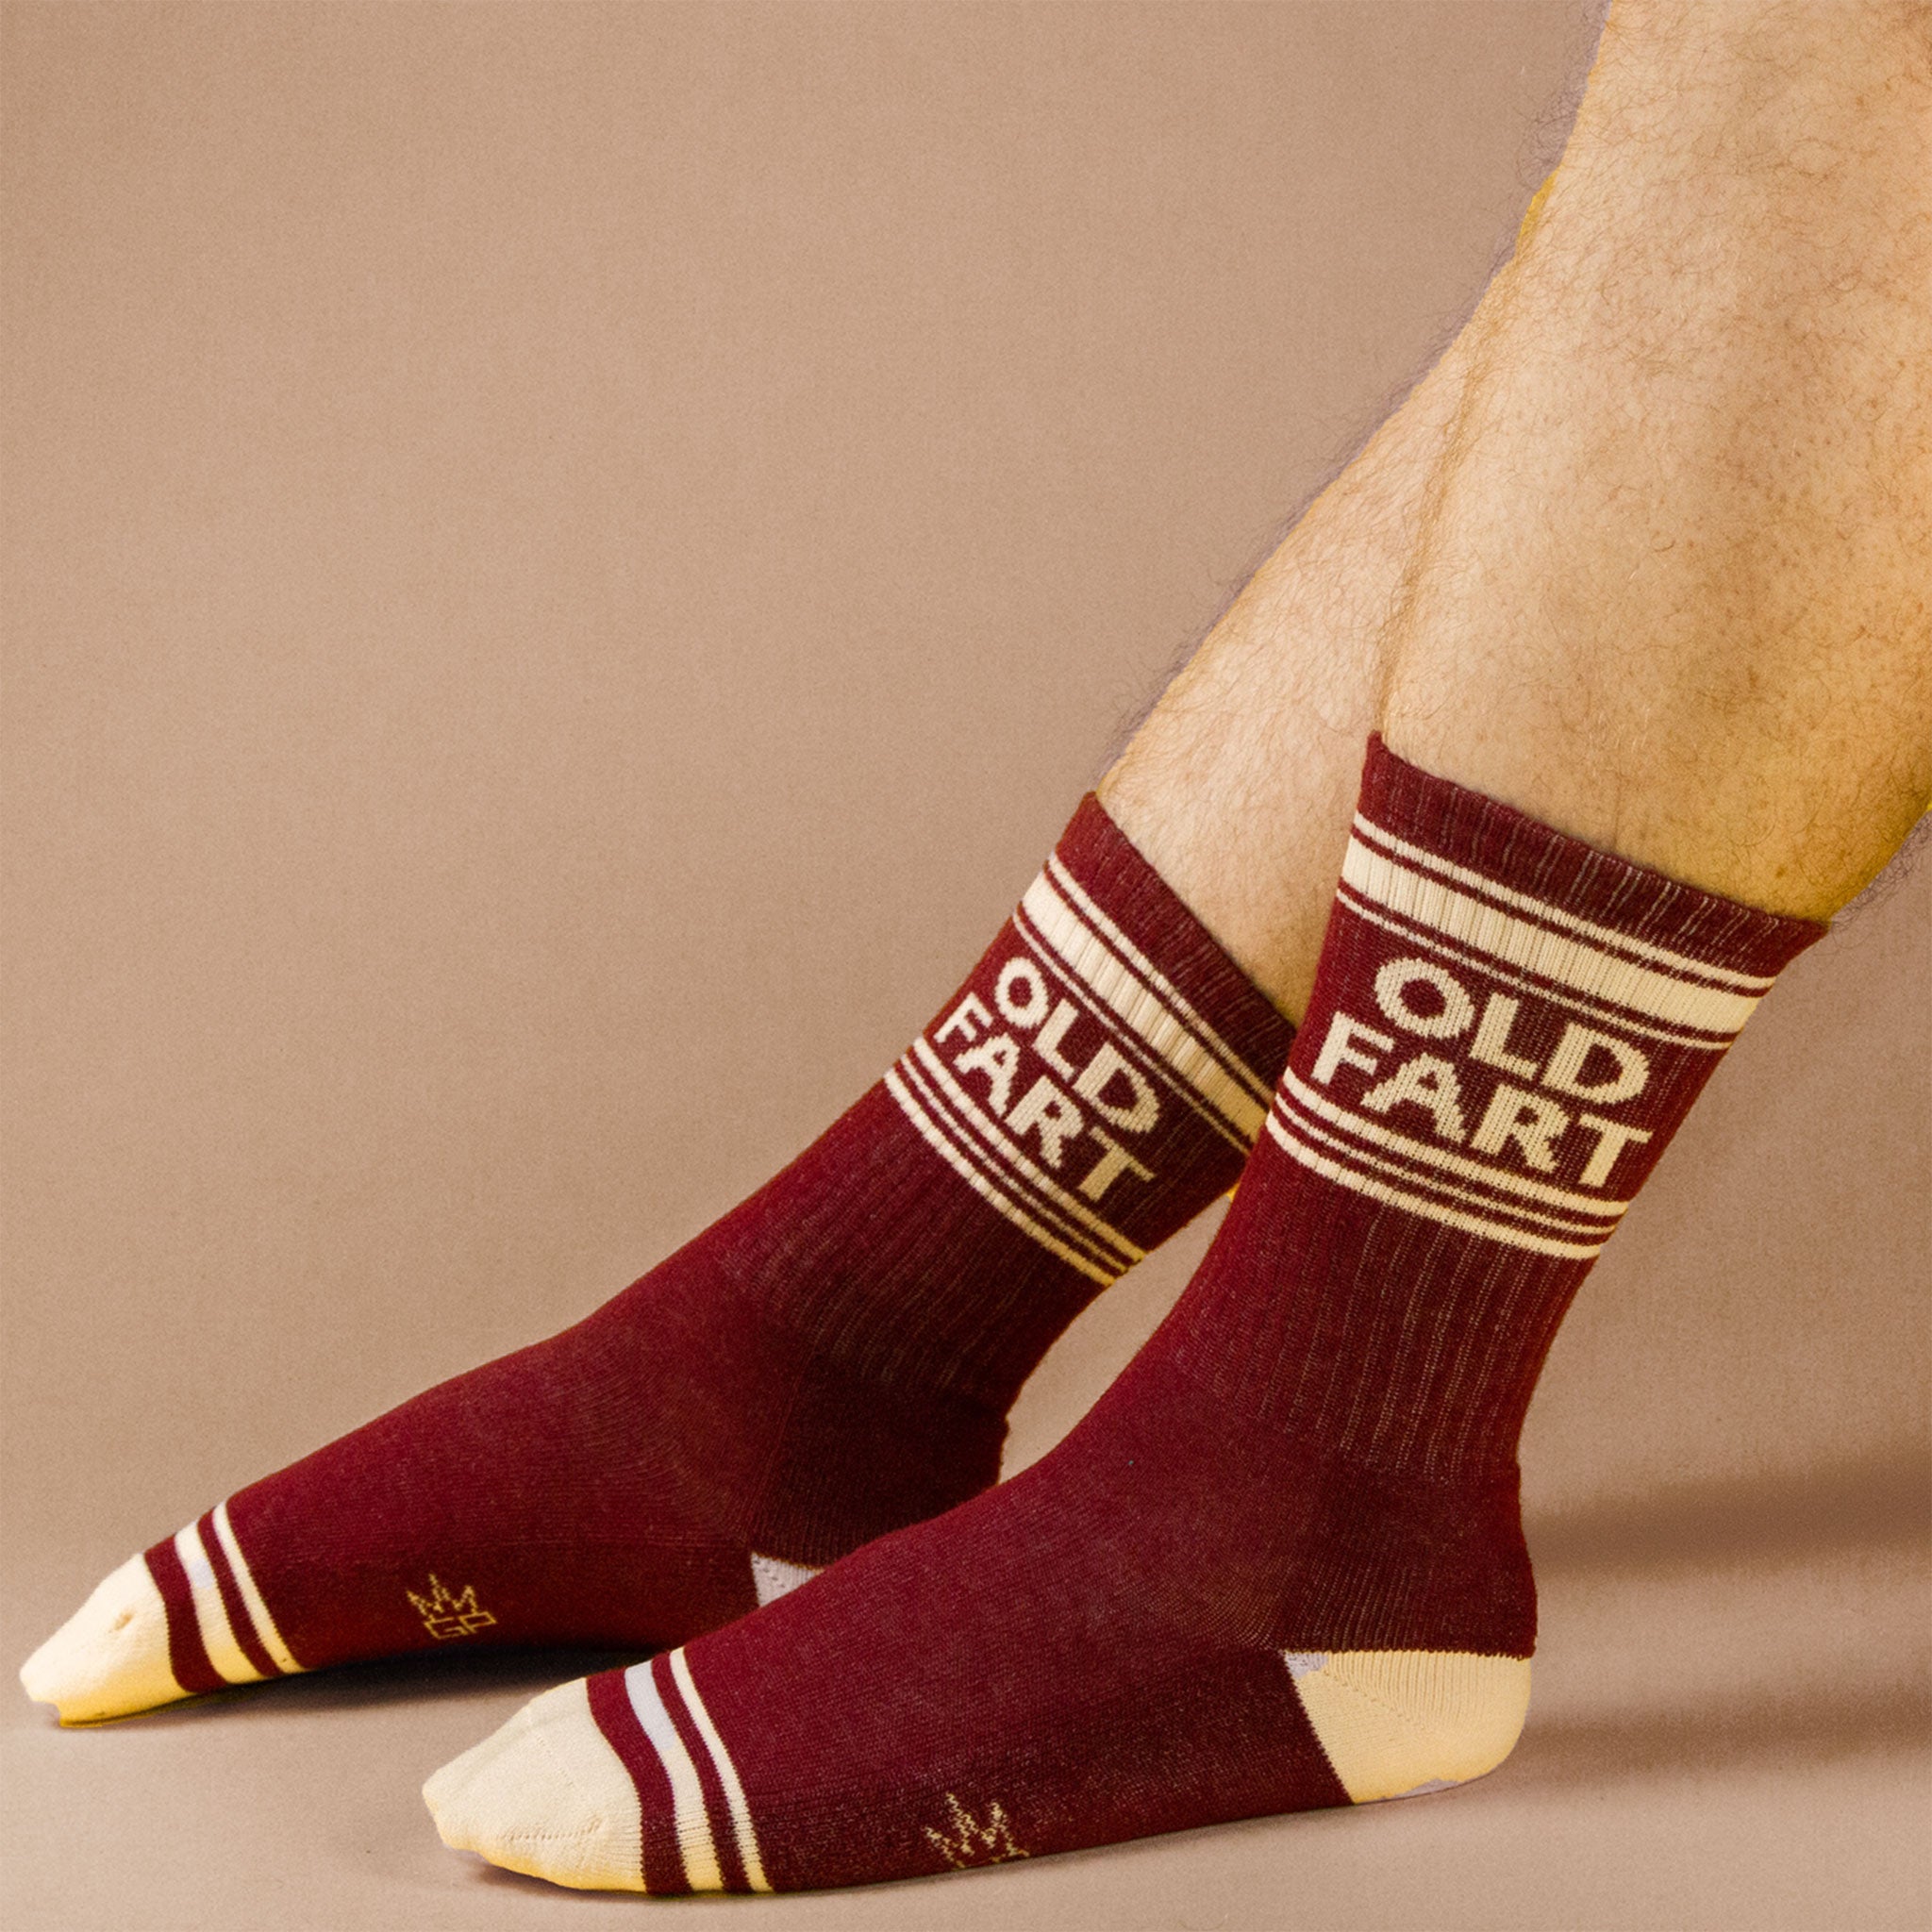 On a neutral is a model wearing a pair of dark red socks with ivory details and text at the top that reads, &quot;Old Fart&quot;.